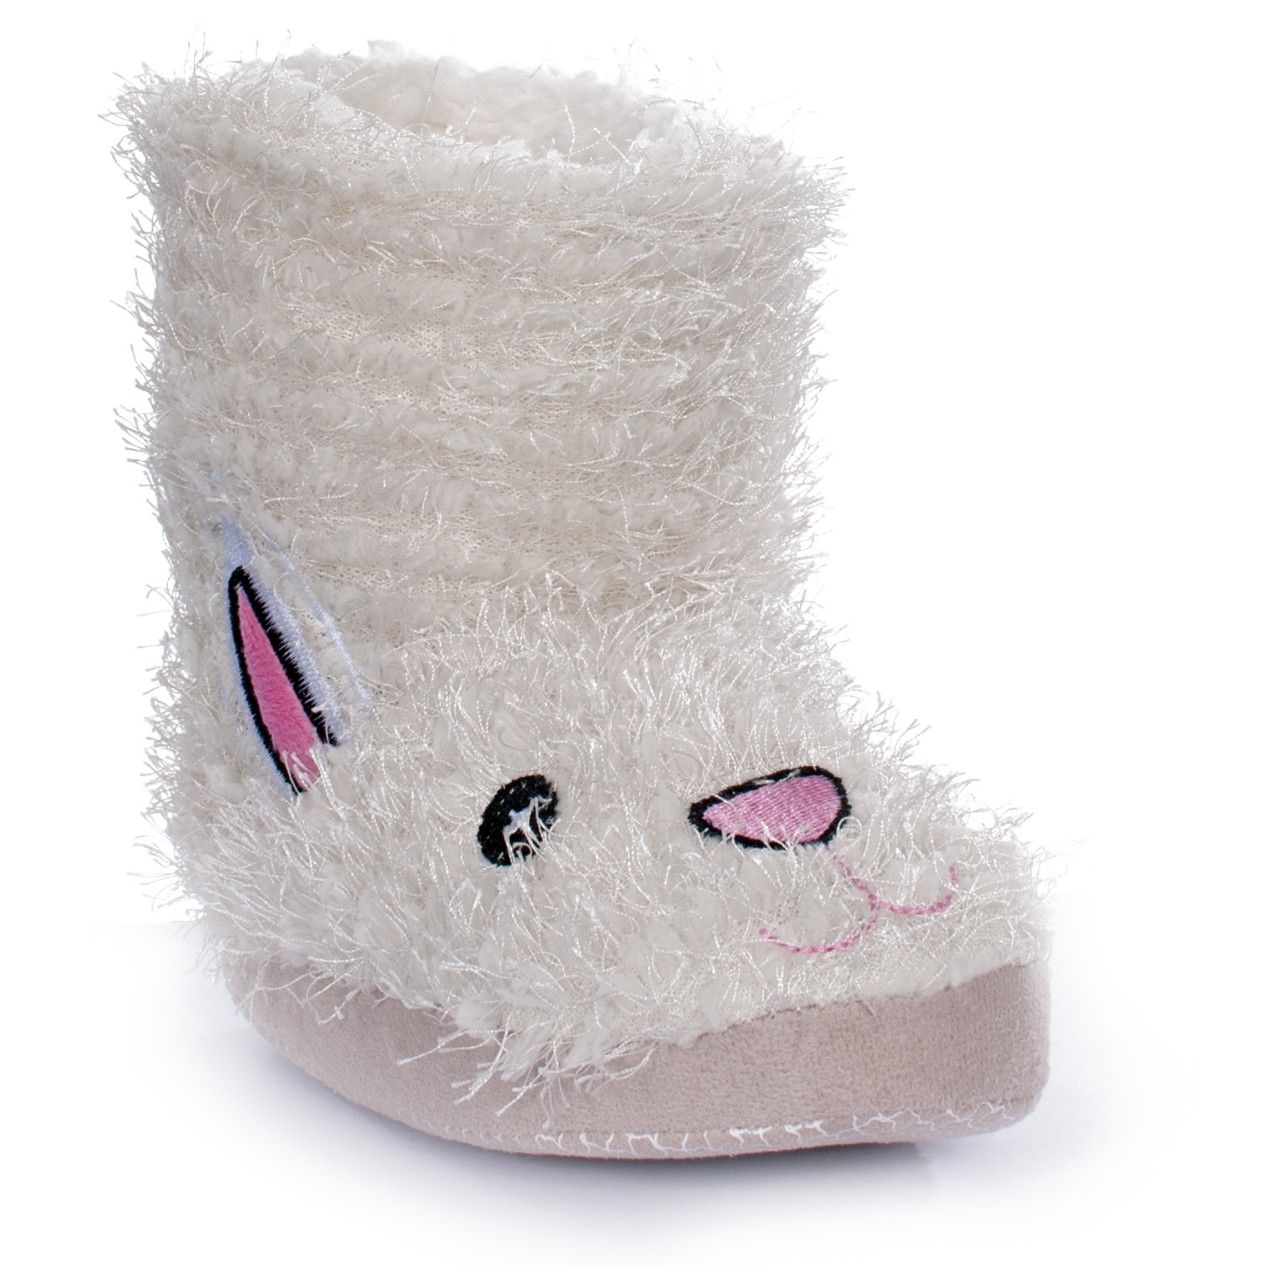 Girls novelty fluffy bunny slippers. Woven logo. Upper Polyester Fur. Insole Soft Fleece. Outsole Microfibre.